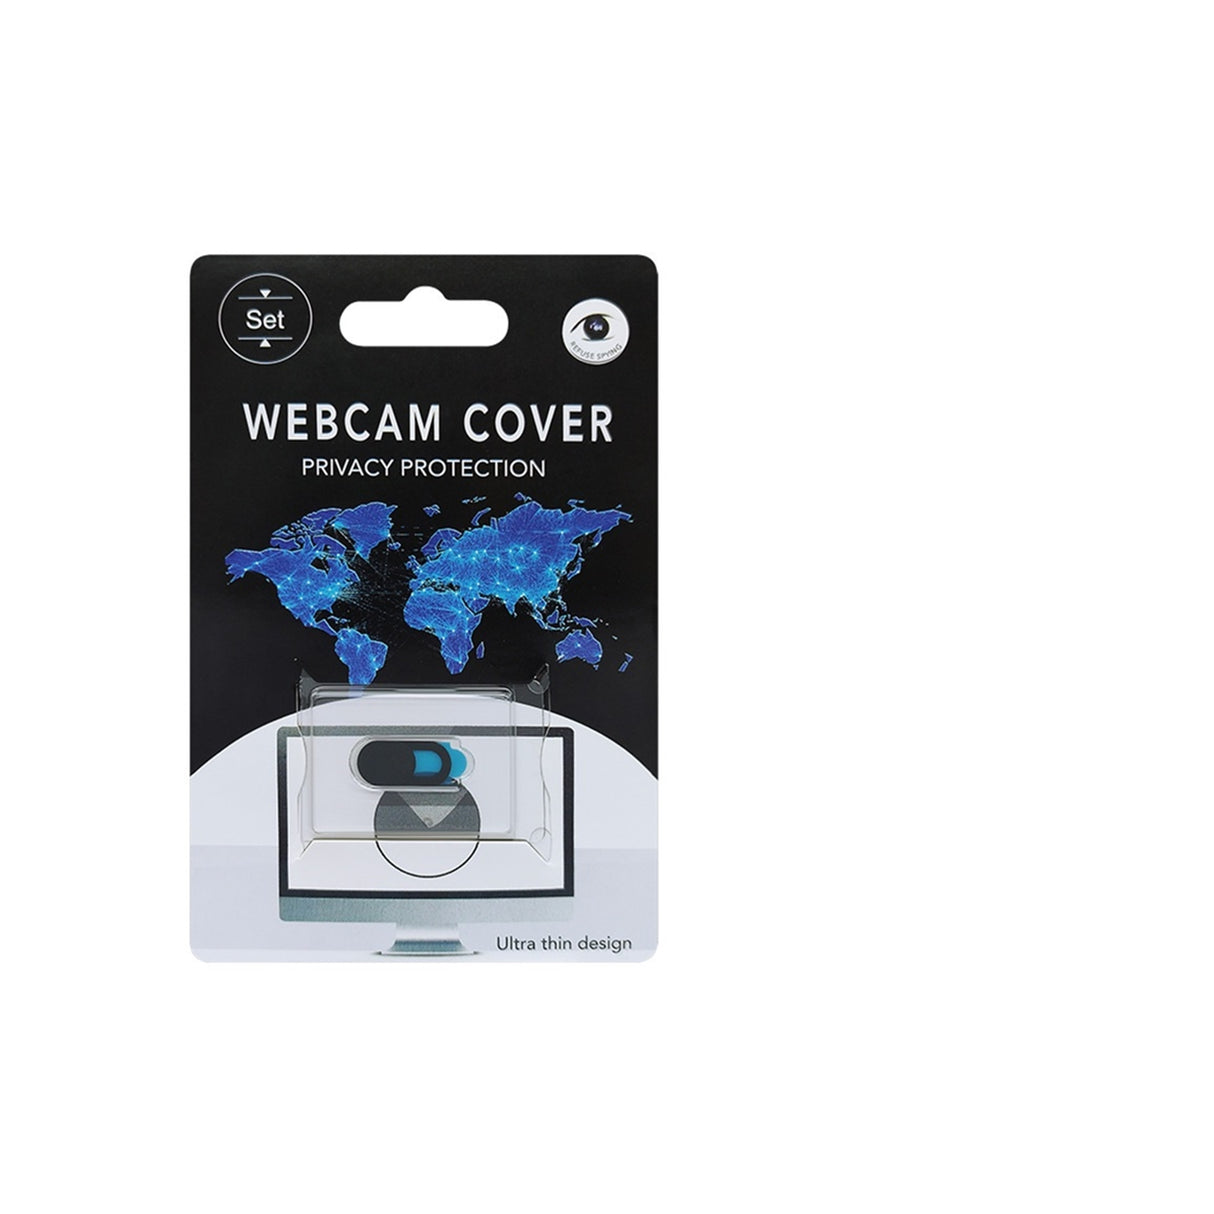 Ultrathin Design Webcam Privacy Cover Slide for laptop, MacBook, PC, Mobile Phone and Other Devices, Protect Your Privacy and Security